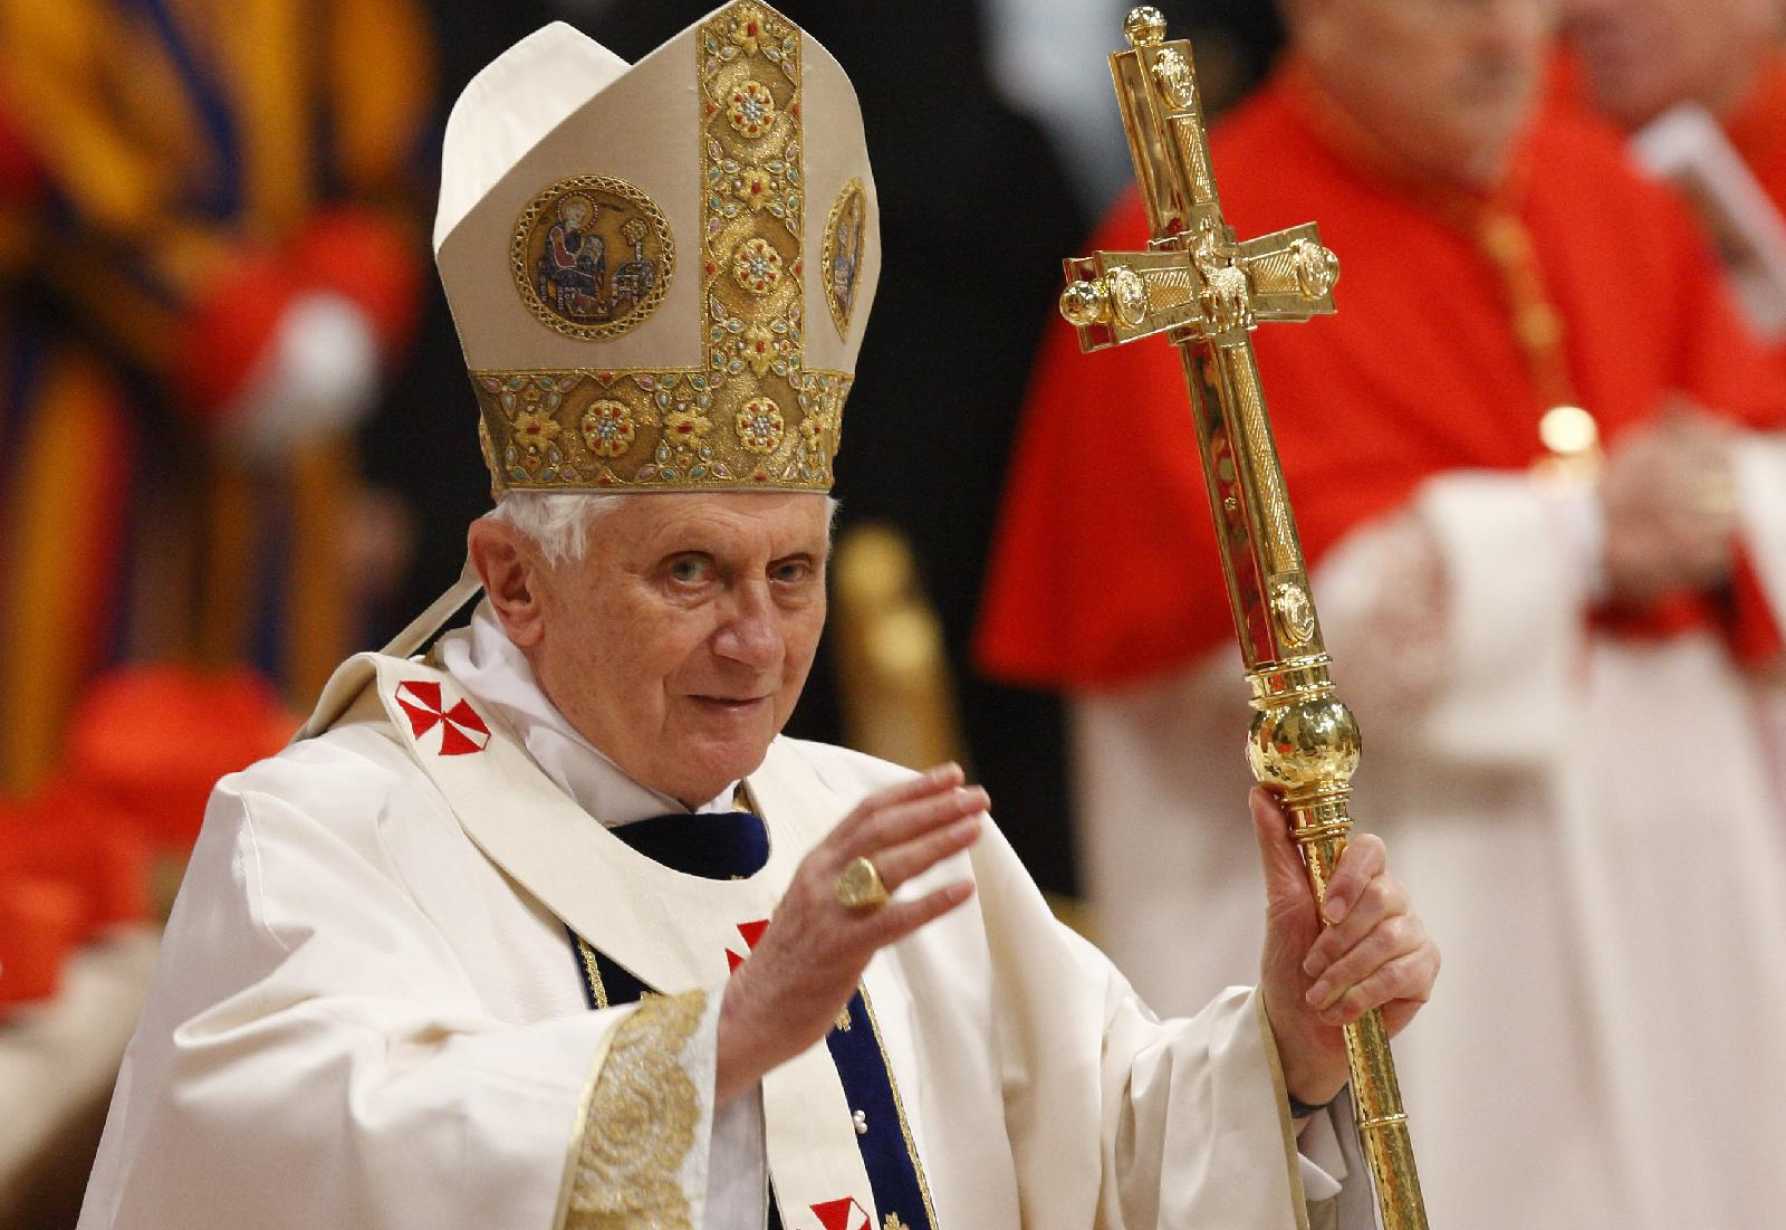 Vatican to publish 'private' homilies of late Pope Benedict